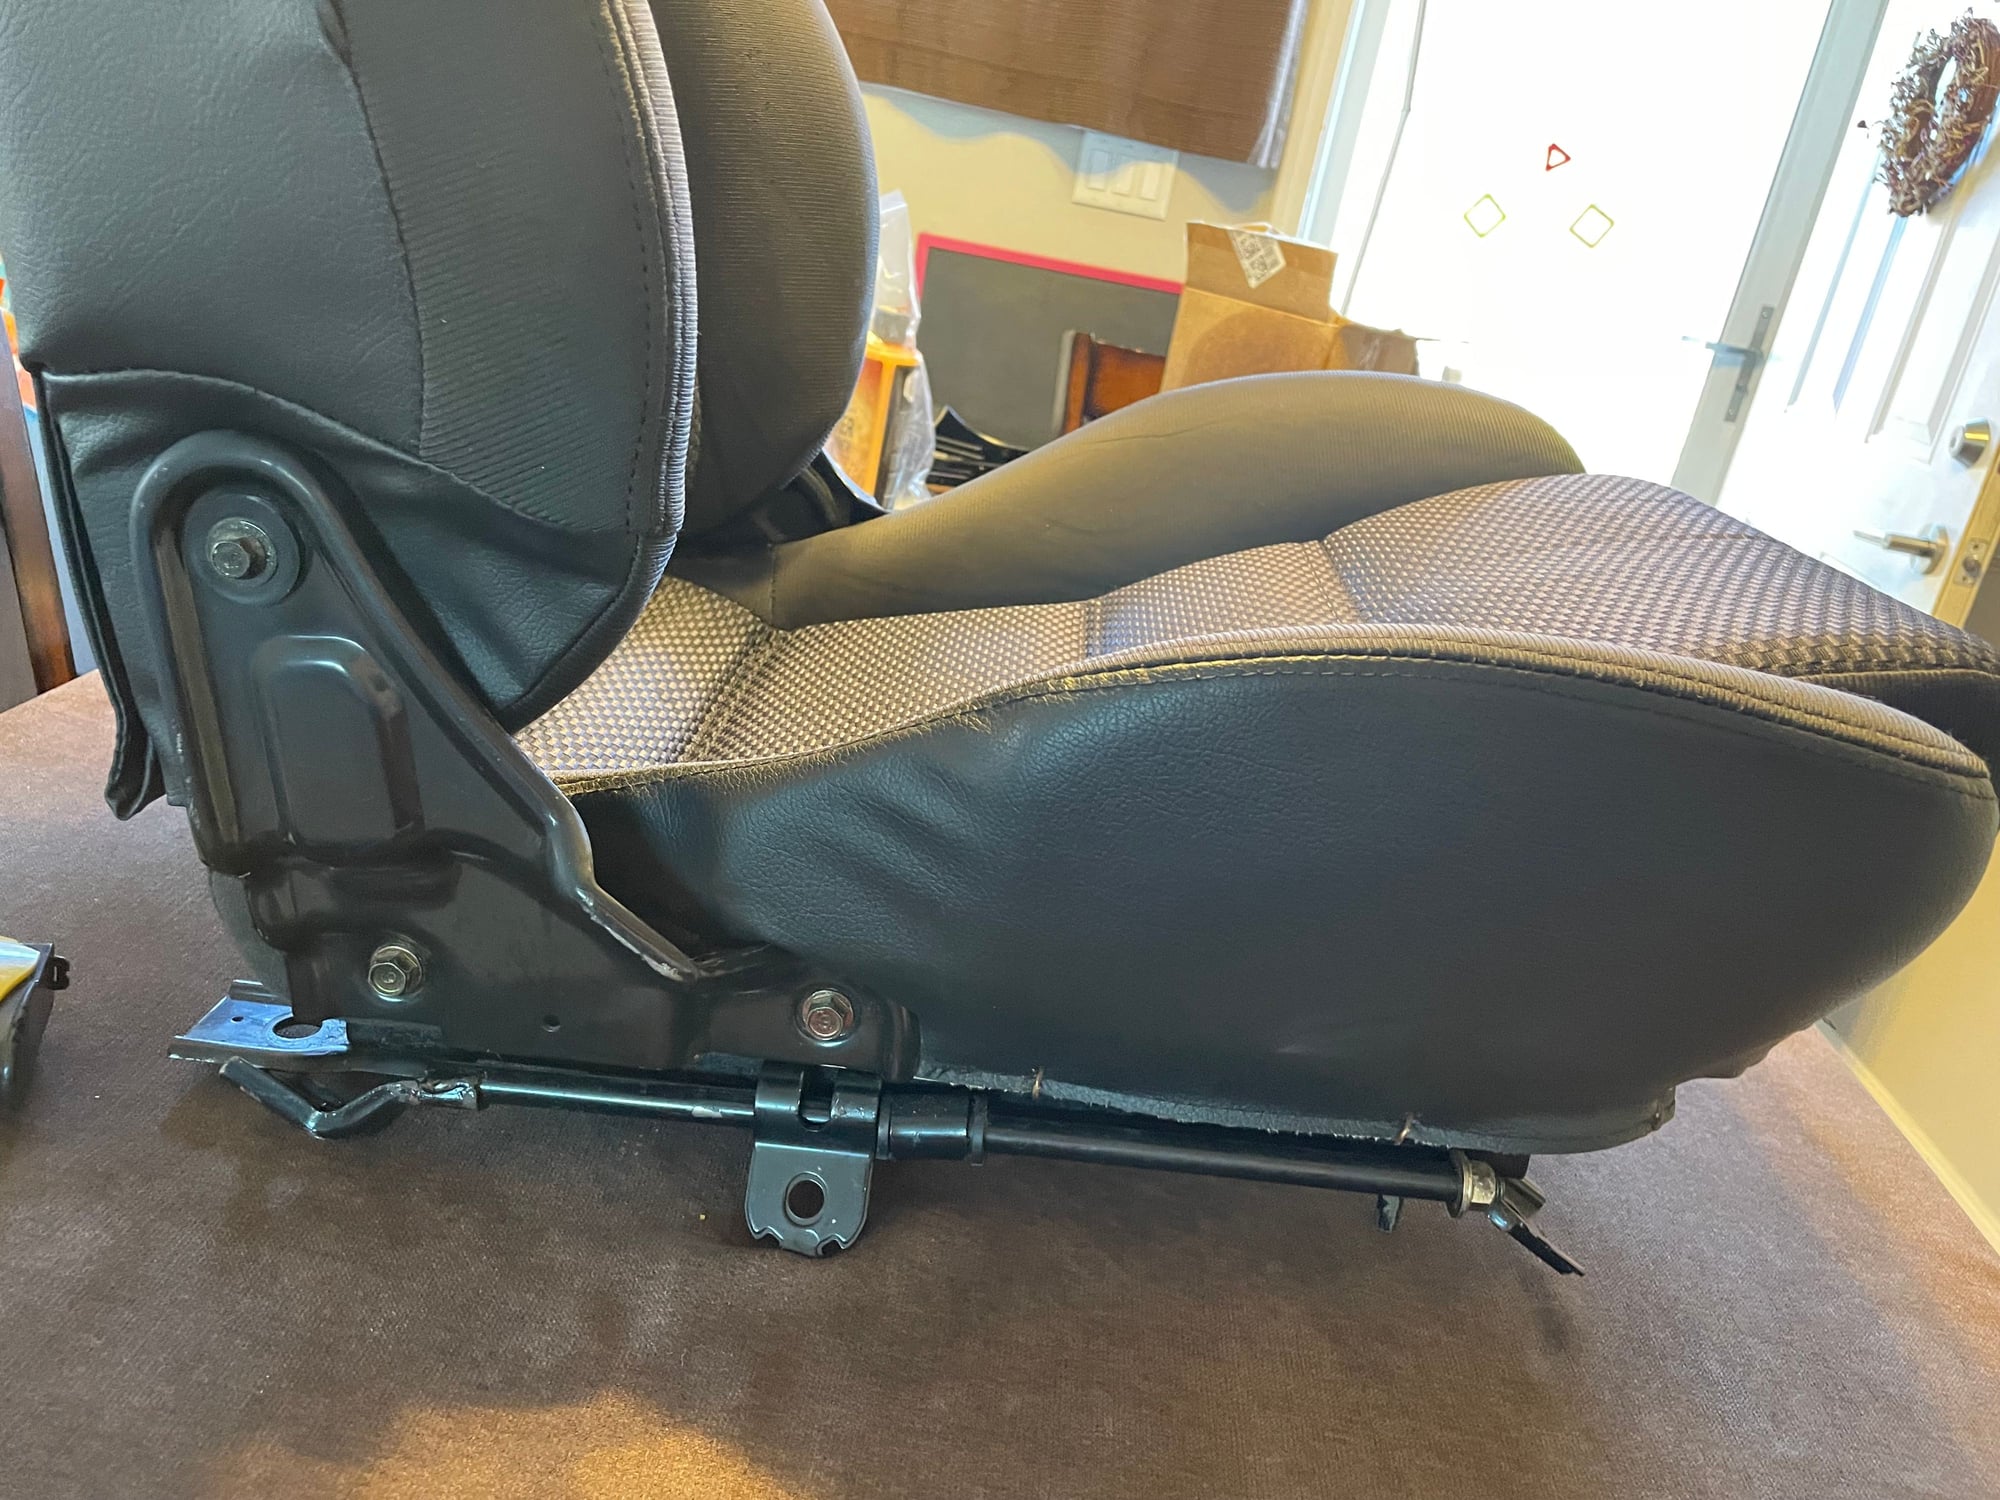 Interior/Upholstery - 1993 FD Base Black Seats - Used - 1993 to 2001 Mazda RX-7 - San Diego, CA 92119, United States